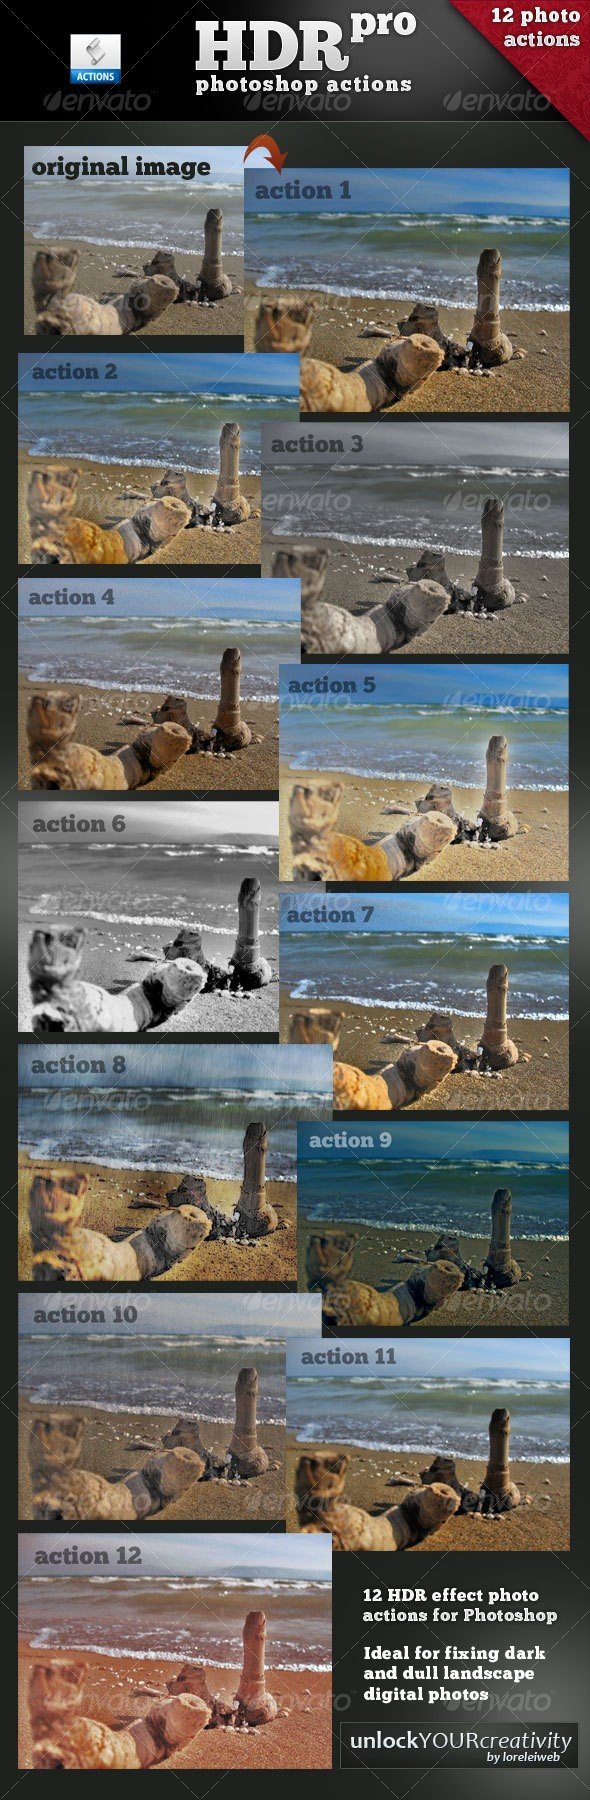 Download Professional HDR Photoshop Actions -